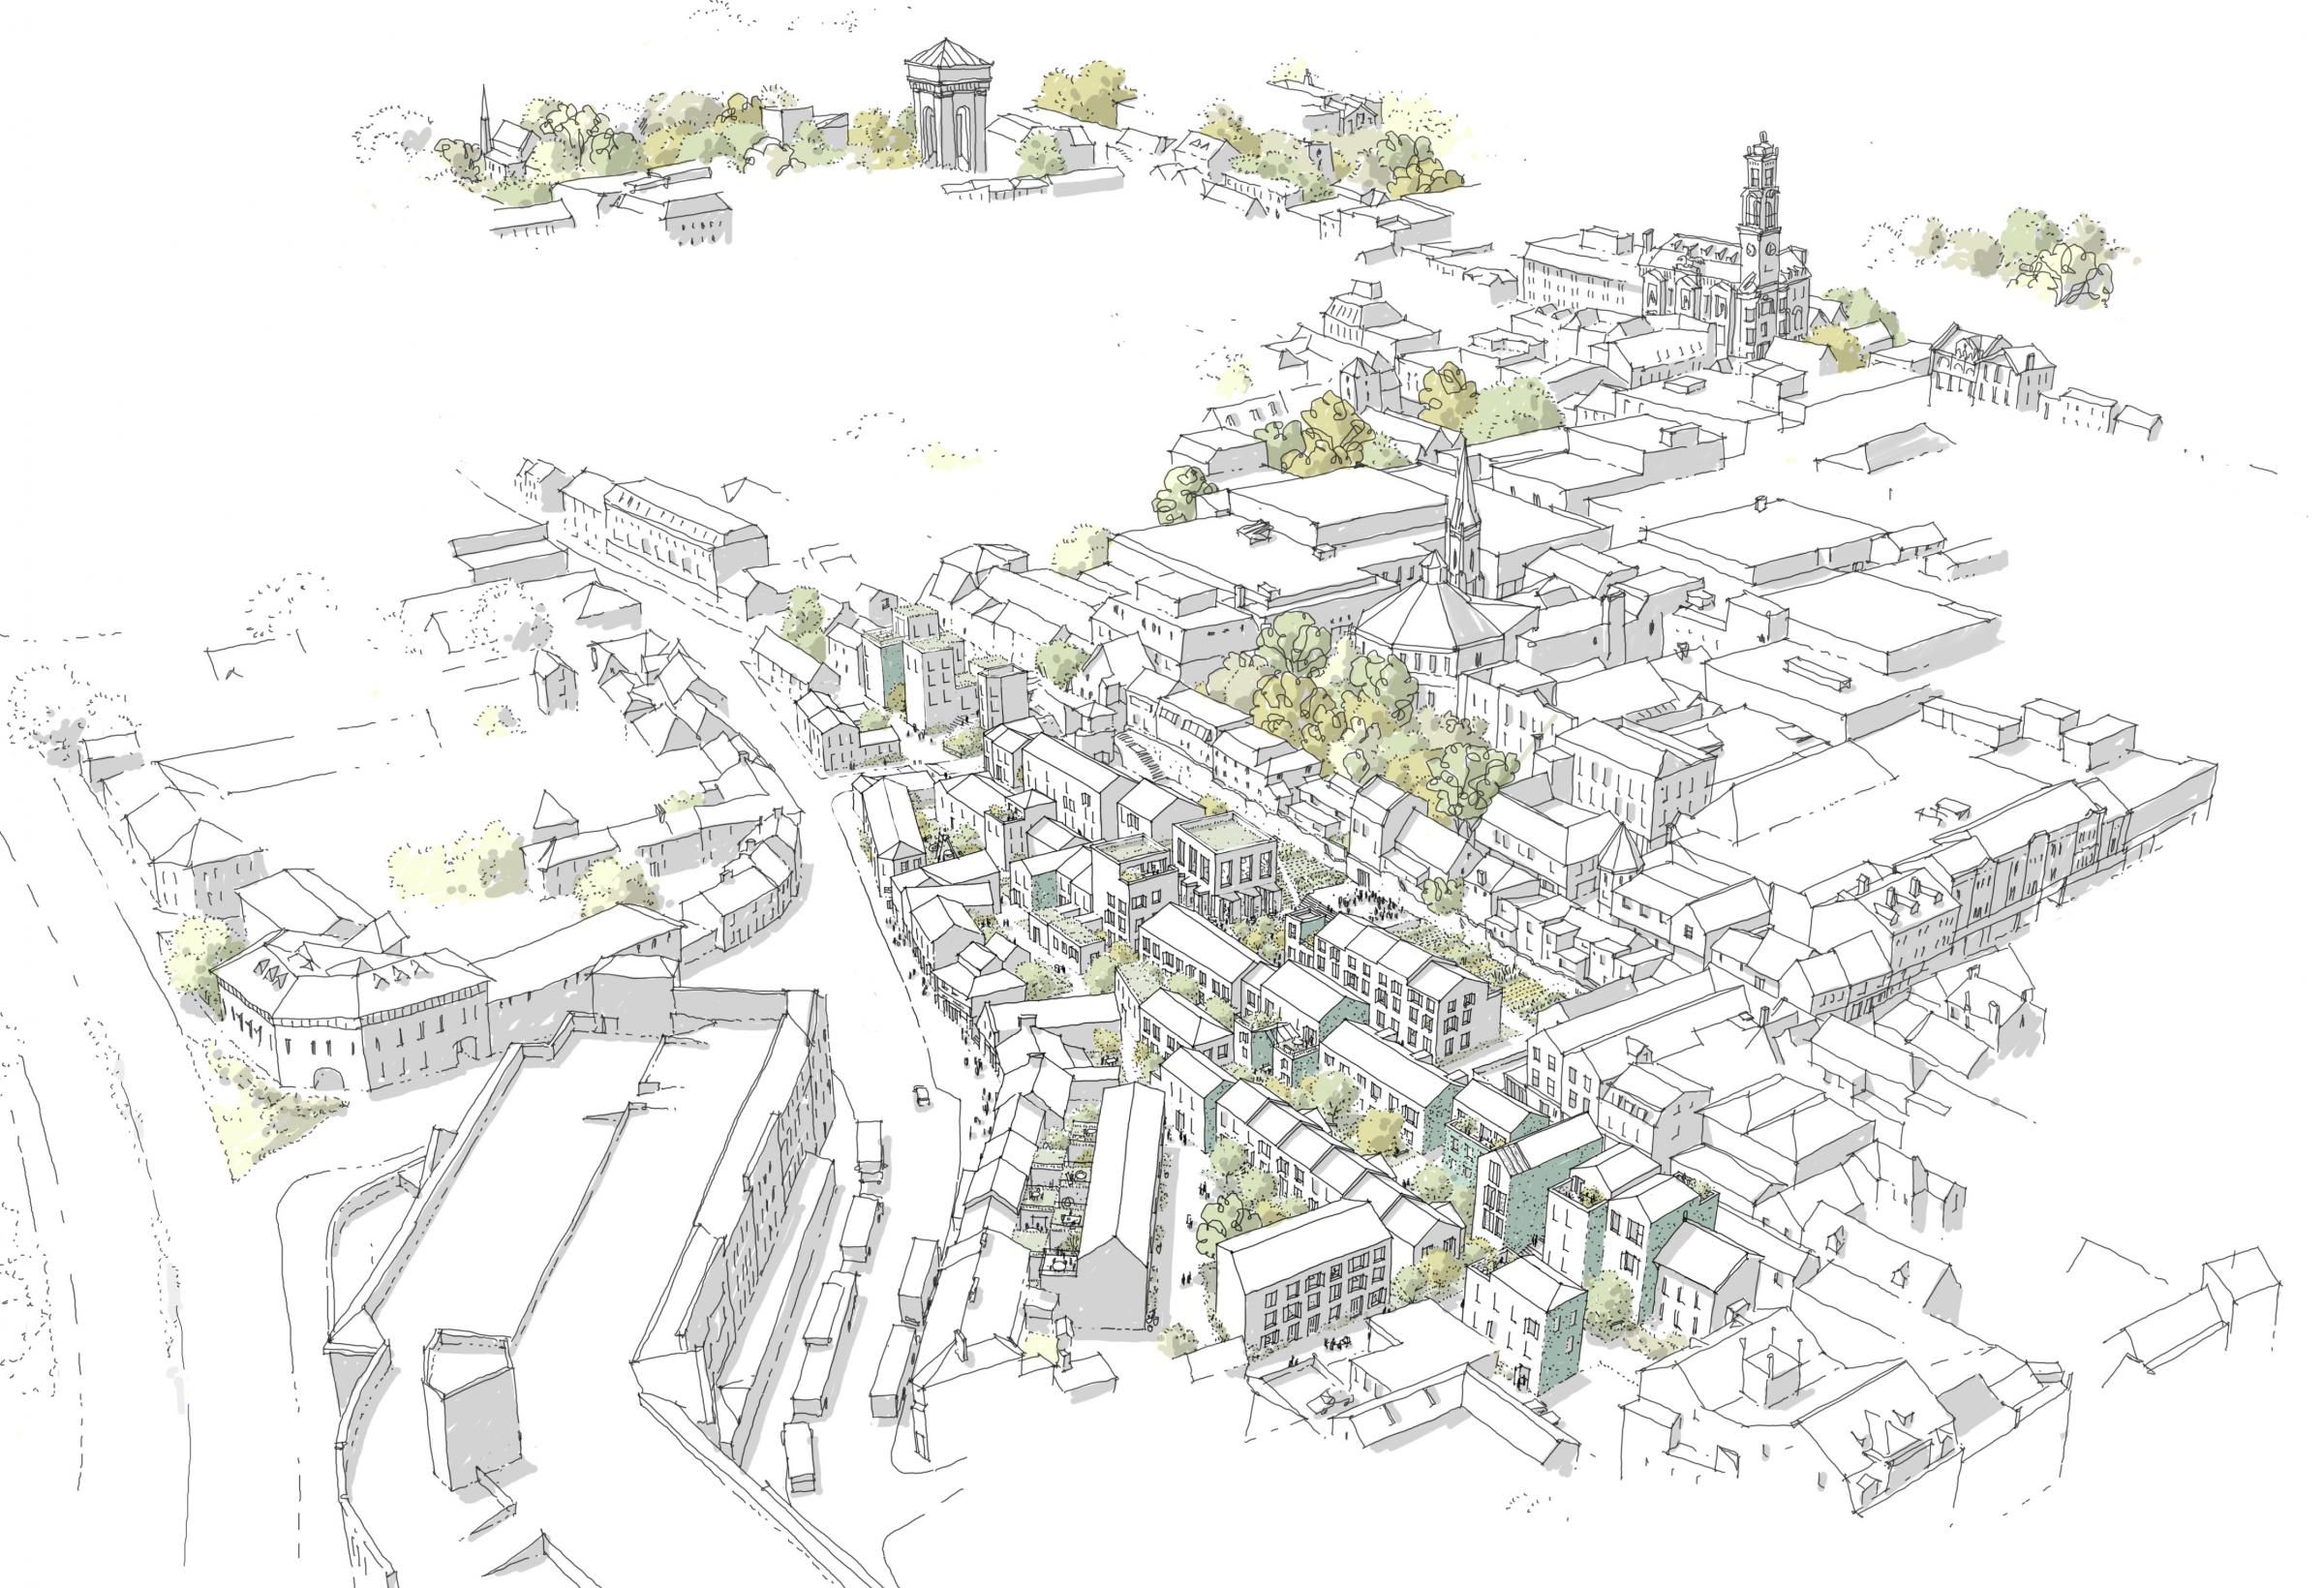 Architects Impression of Vineyard Gate, Colchester for illustrative purposes only – aerial view as proposed